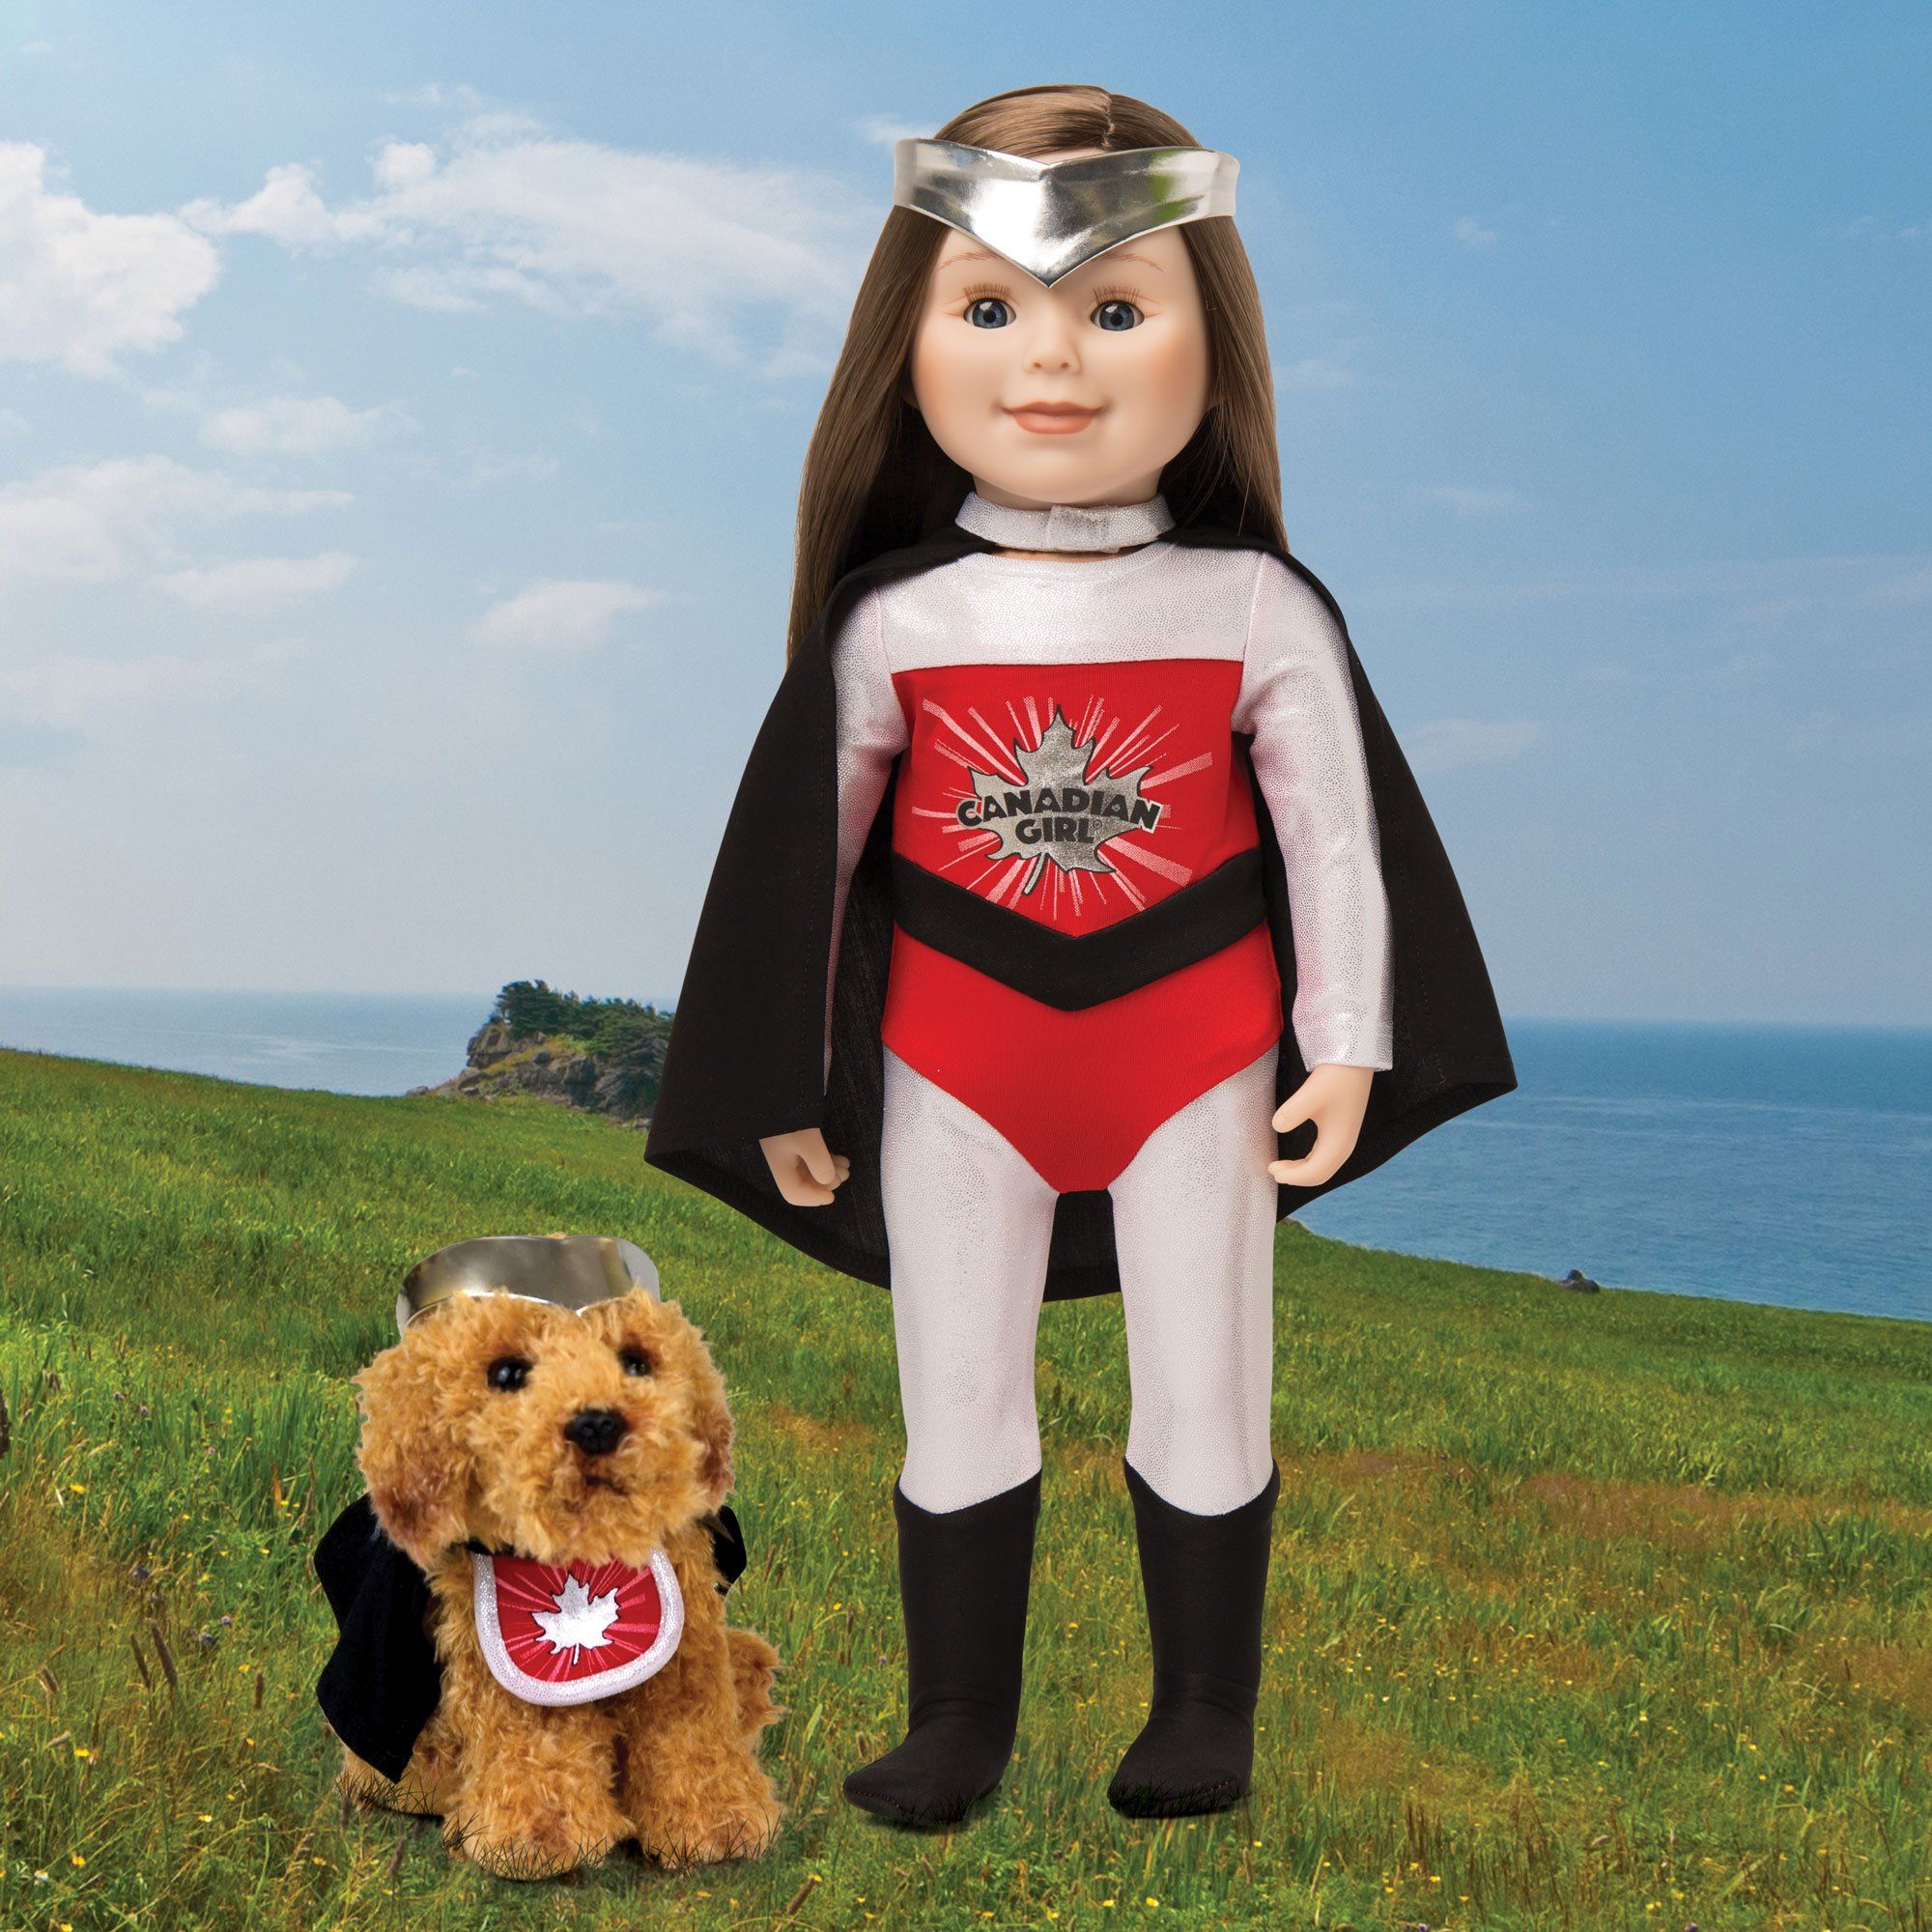 Super Hero Costume for 18 Inch Doll and Dog | Maplelea Doll Company